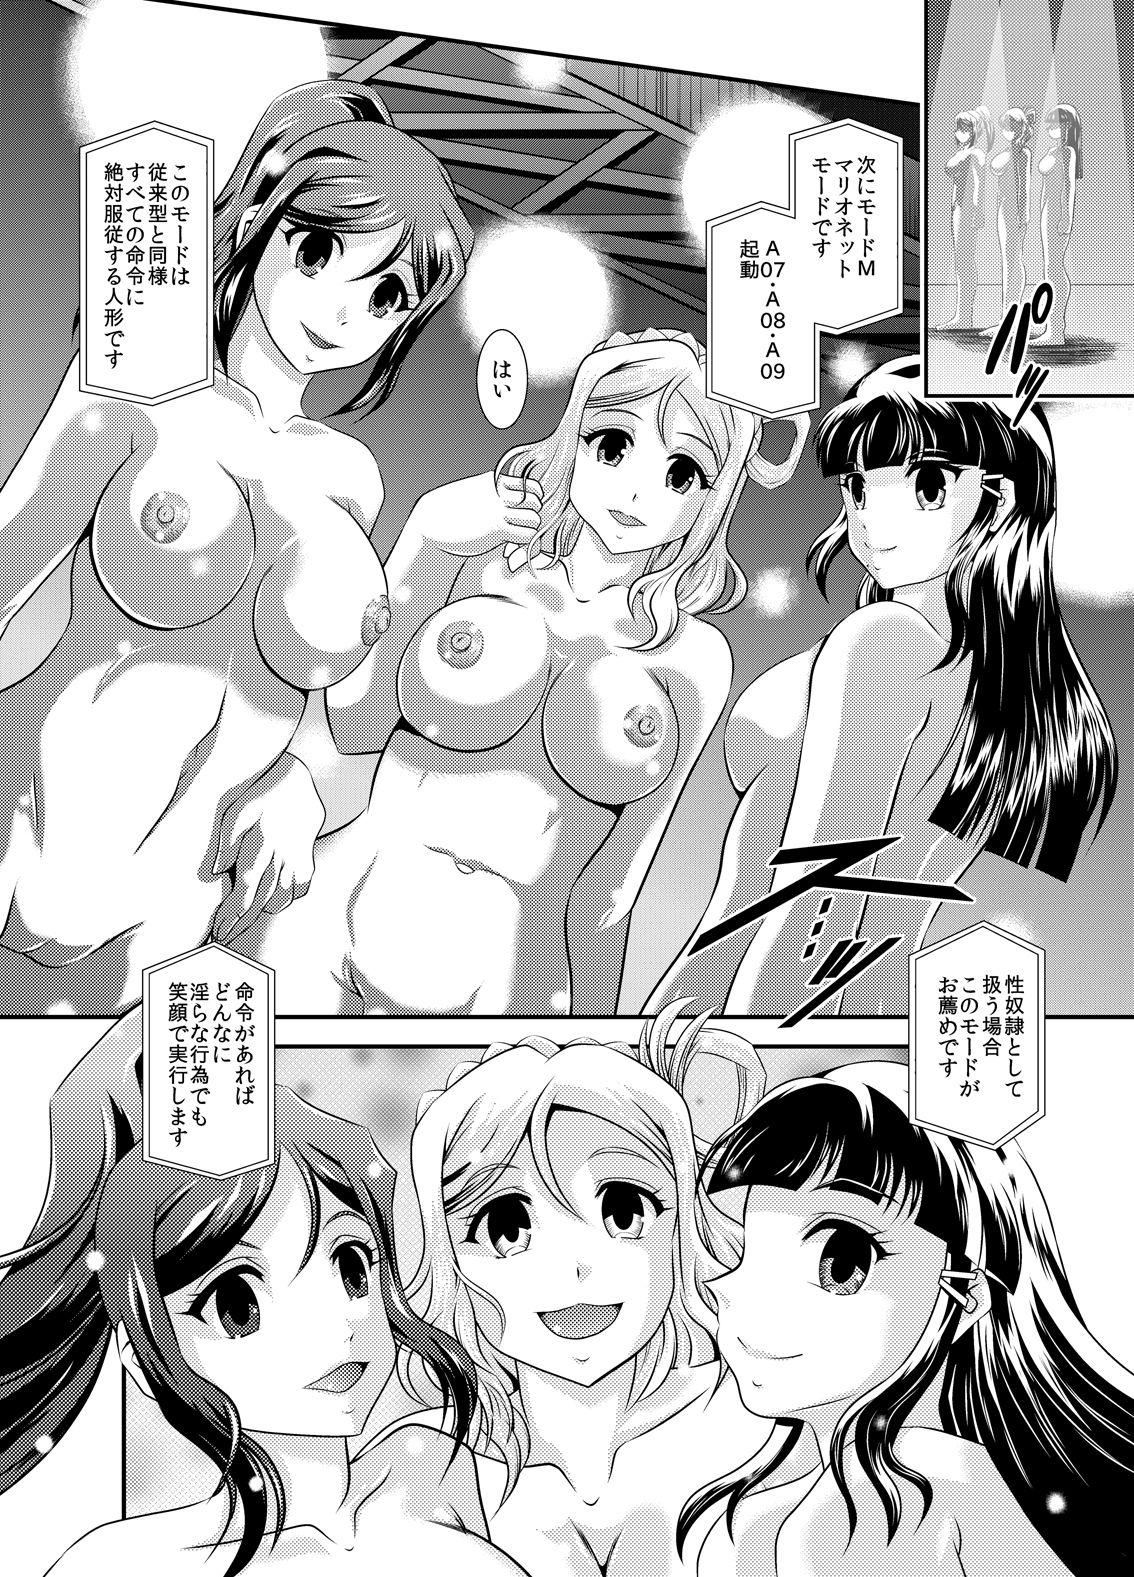 Glasses ProjectAqours EP04:HOPELESS - Love live sunshine Sexy Girl - Page 8